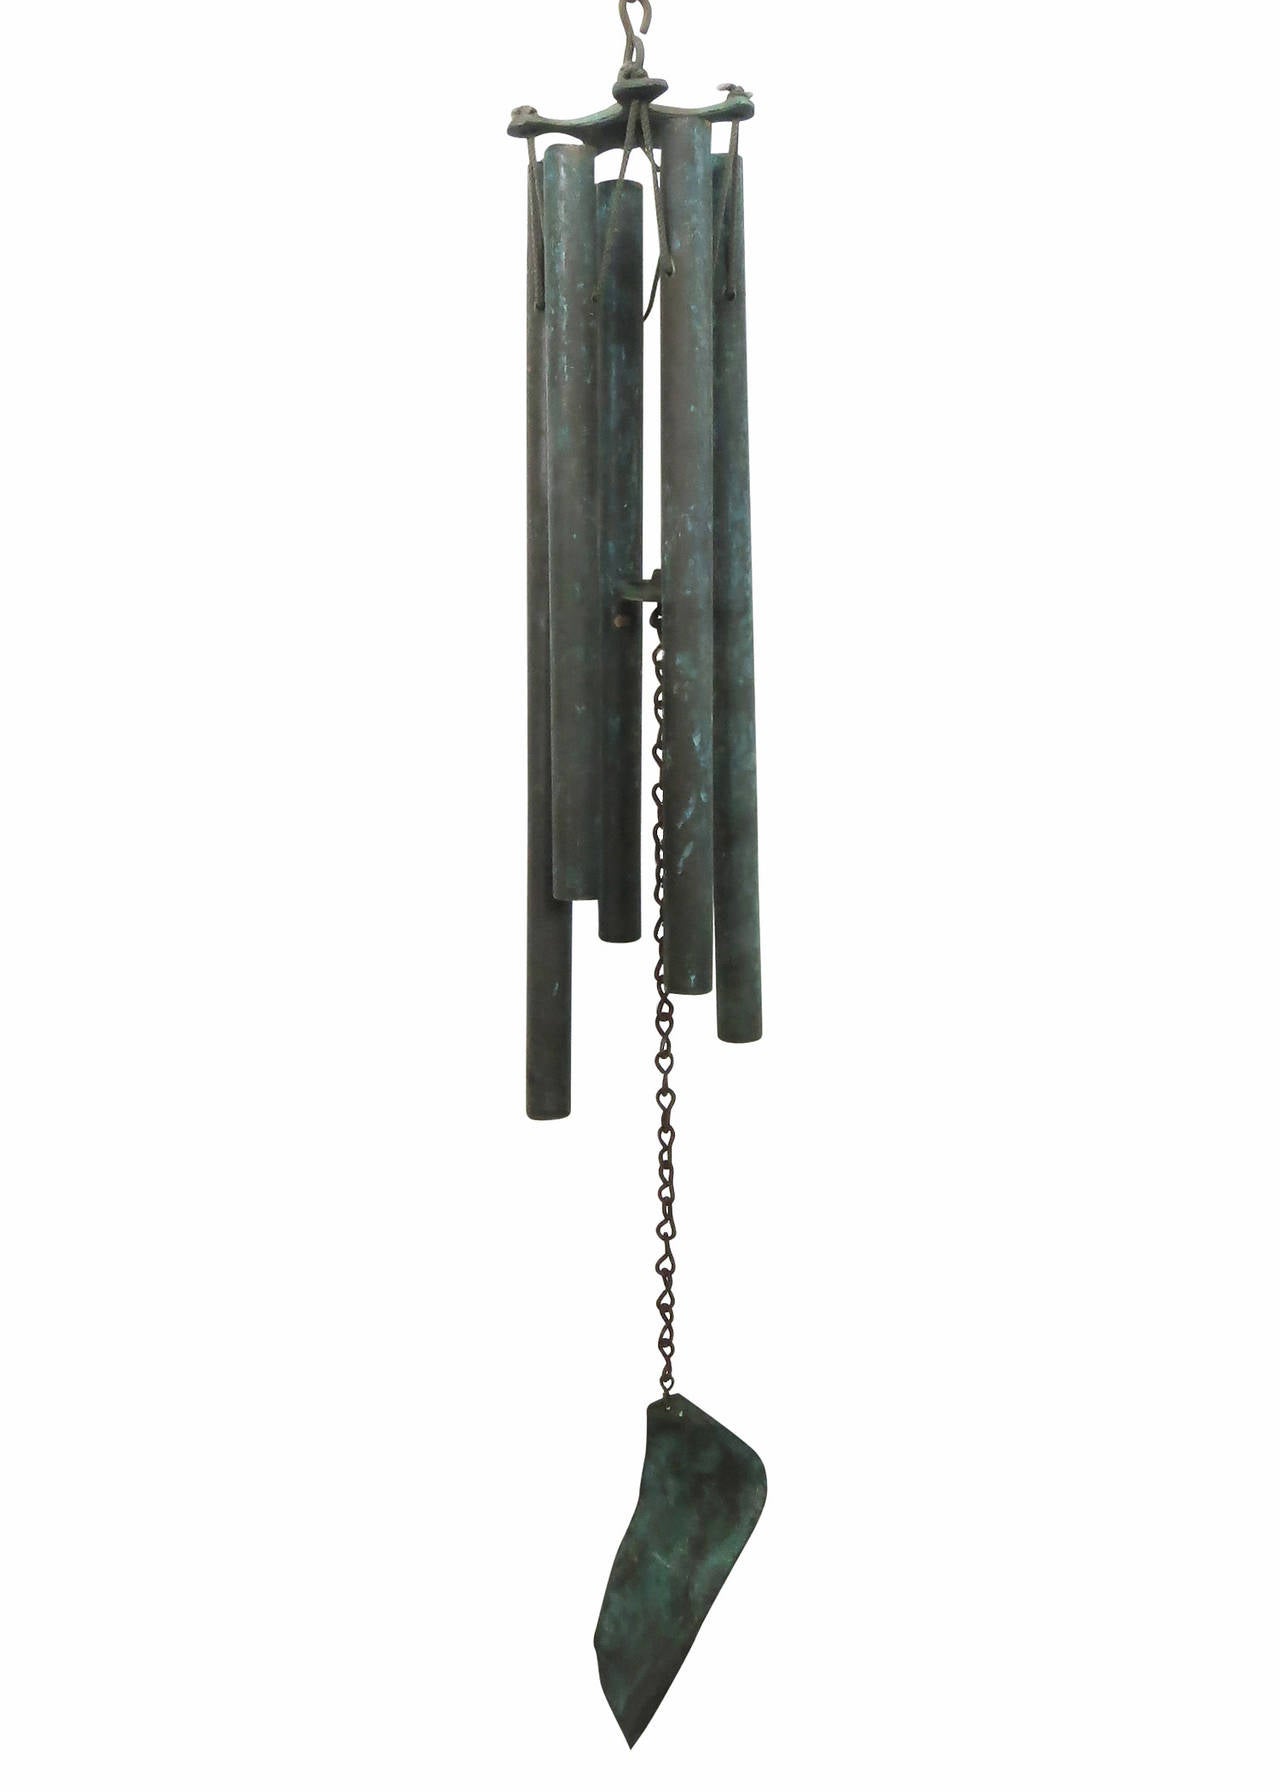 Walter Lamb Attributed Modernist Bronze Tubing and Sheet Bronze Wind Chimes with a sound similar to church bells. From the beaches of Hawaii Walter Lamb created wonderful Furniture and Accessories in the 1950s and 1960s.

Small  18